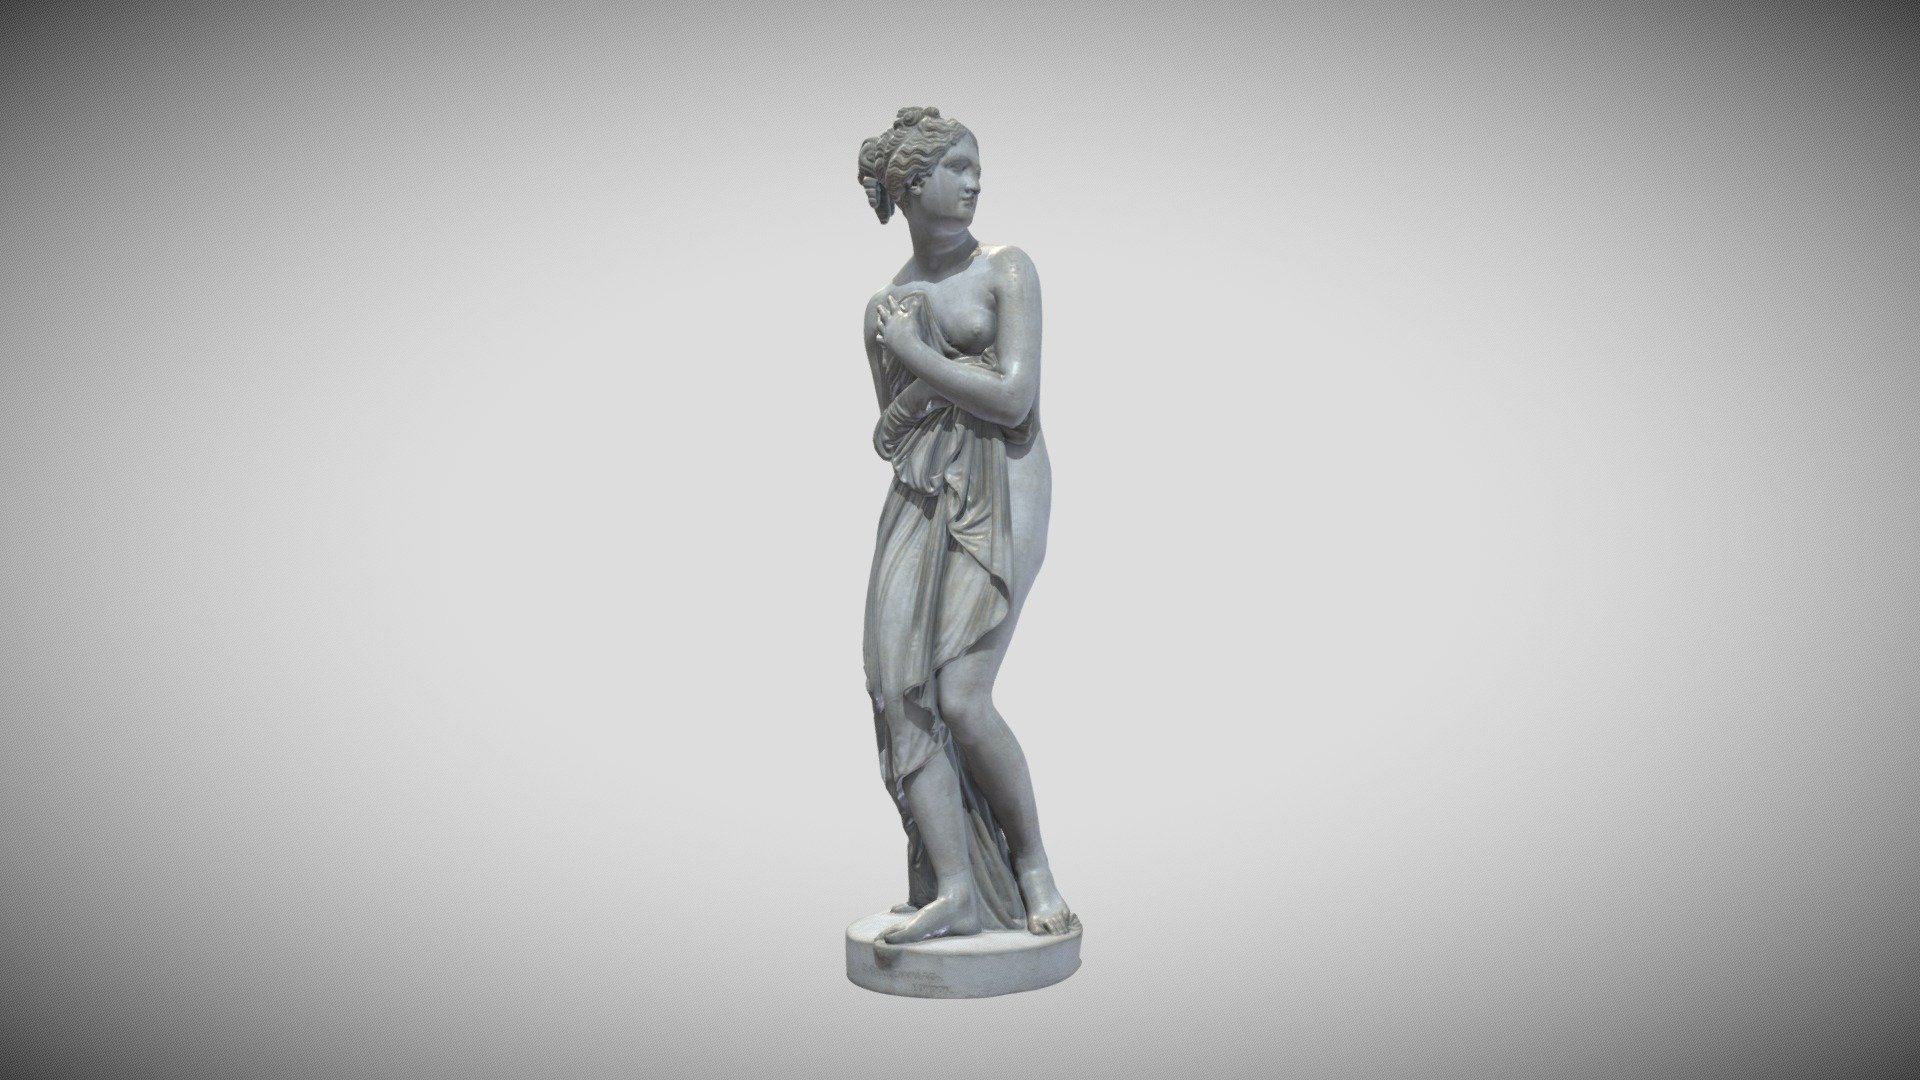 Original very nice 3D Scan from the SMK - Statens Museum for Kunst

https://collection.smk.dk/#/detail/KAS793

here the Painted Gaming Version LR... 3d model